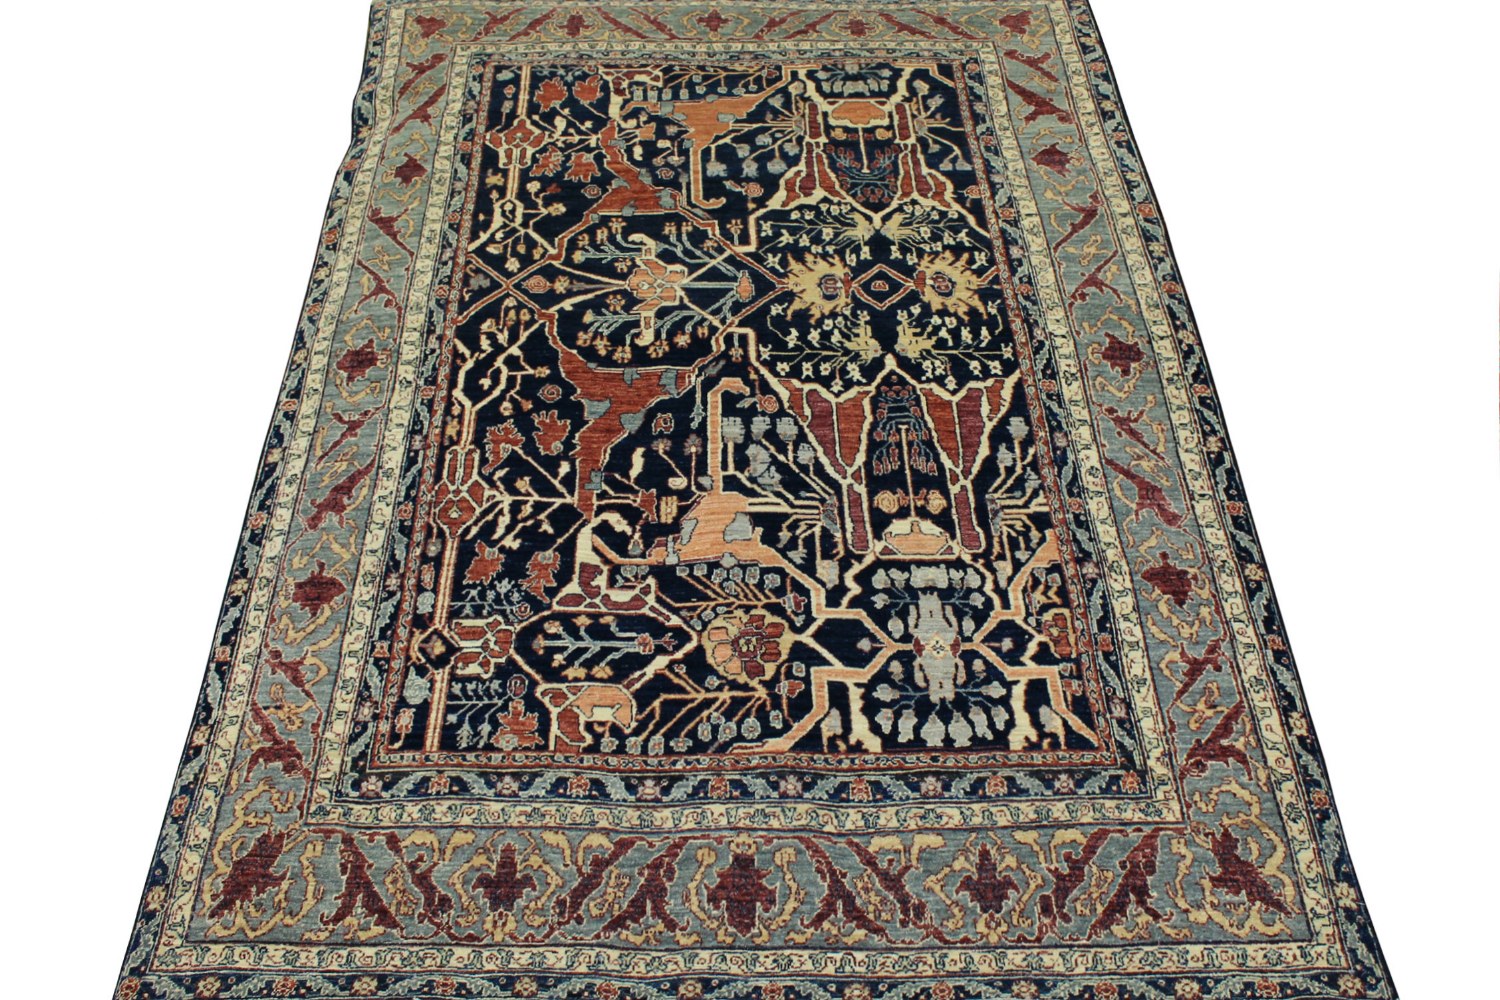 6x9 Antique Revival Hand Knotted Wool Area Rug - MR19982